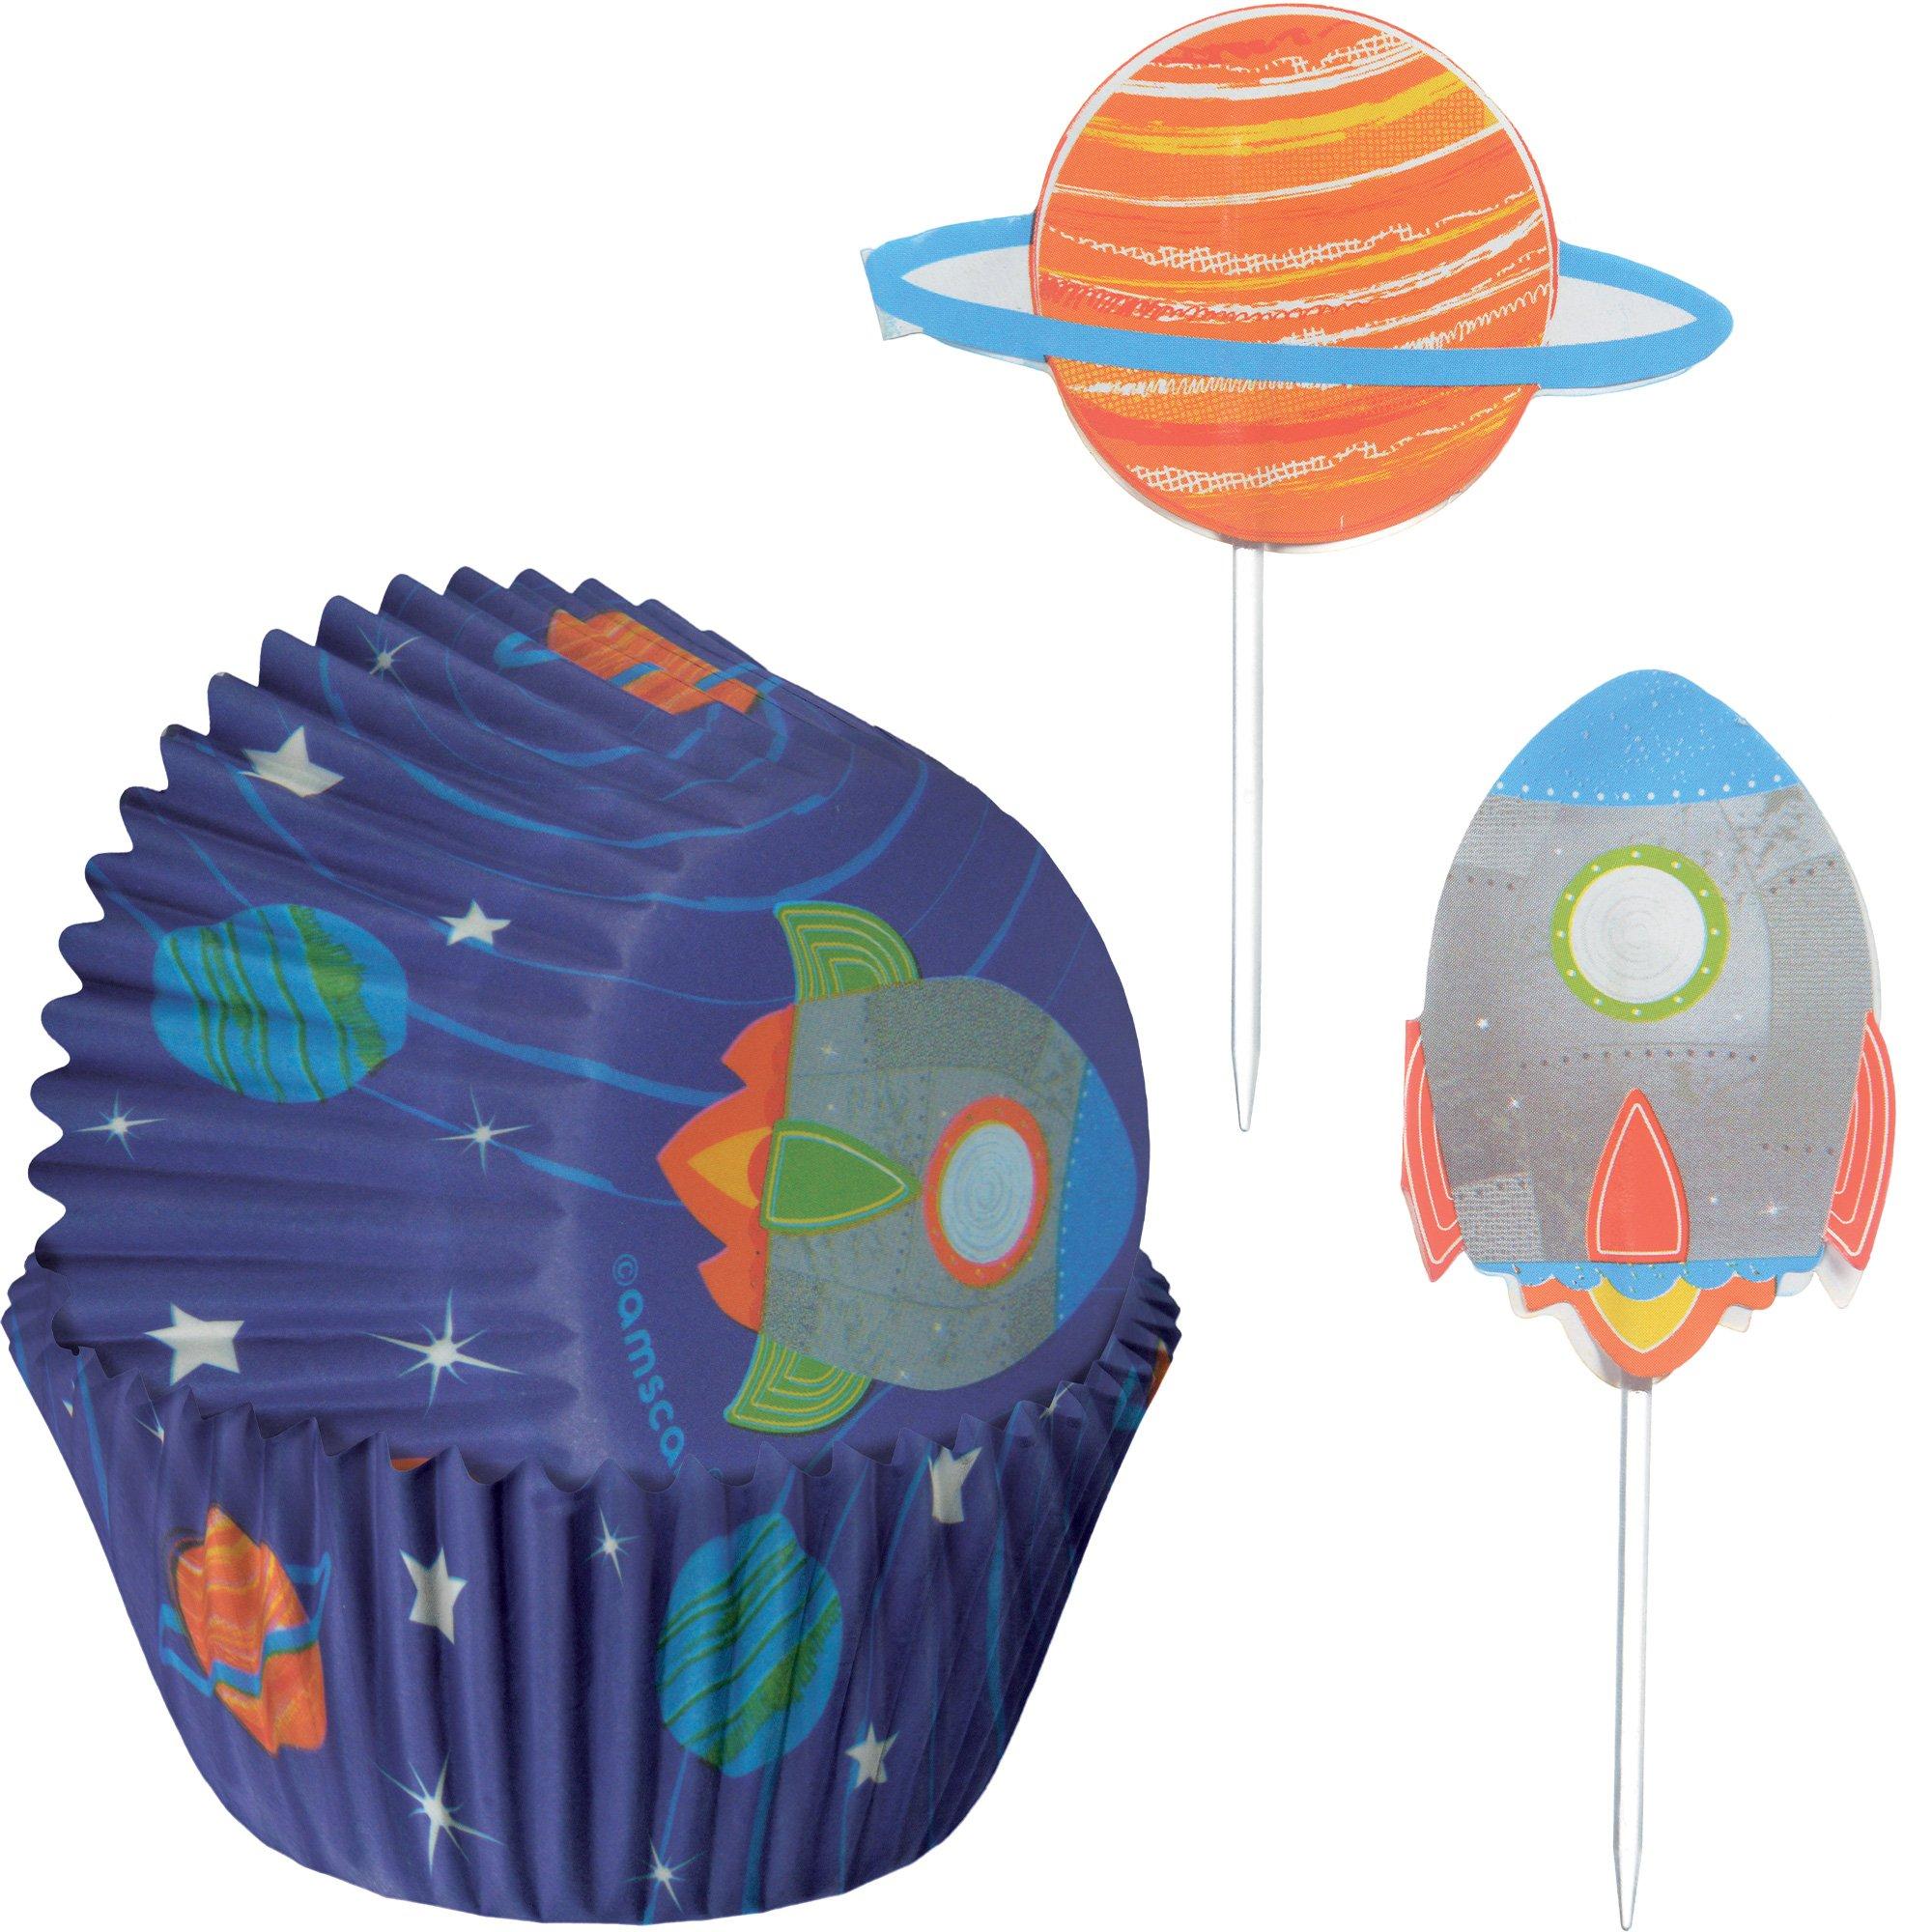 Blast Off Cupcake Decorating Kit for 24 Guests